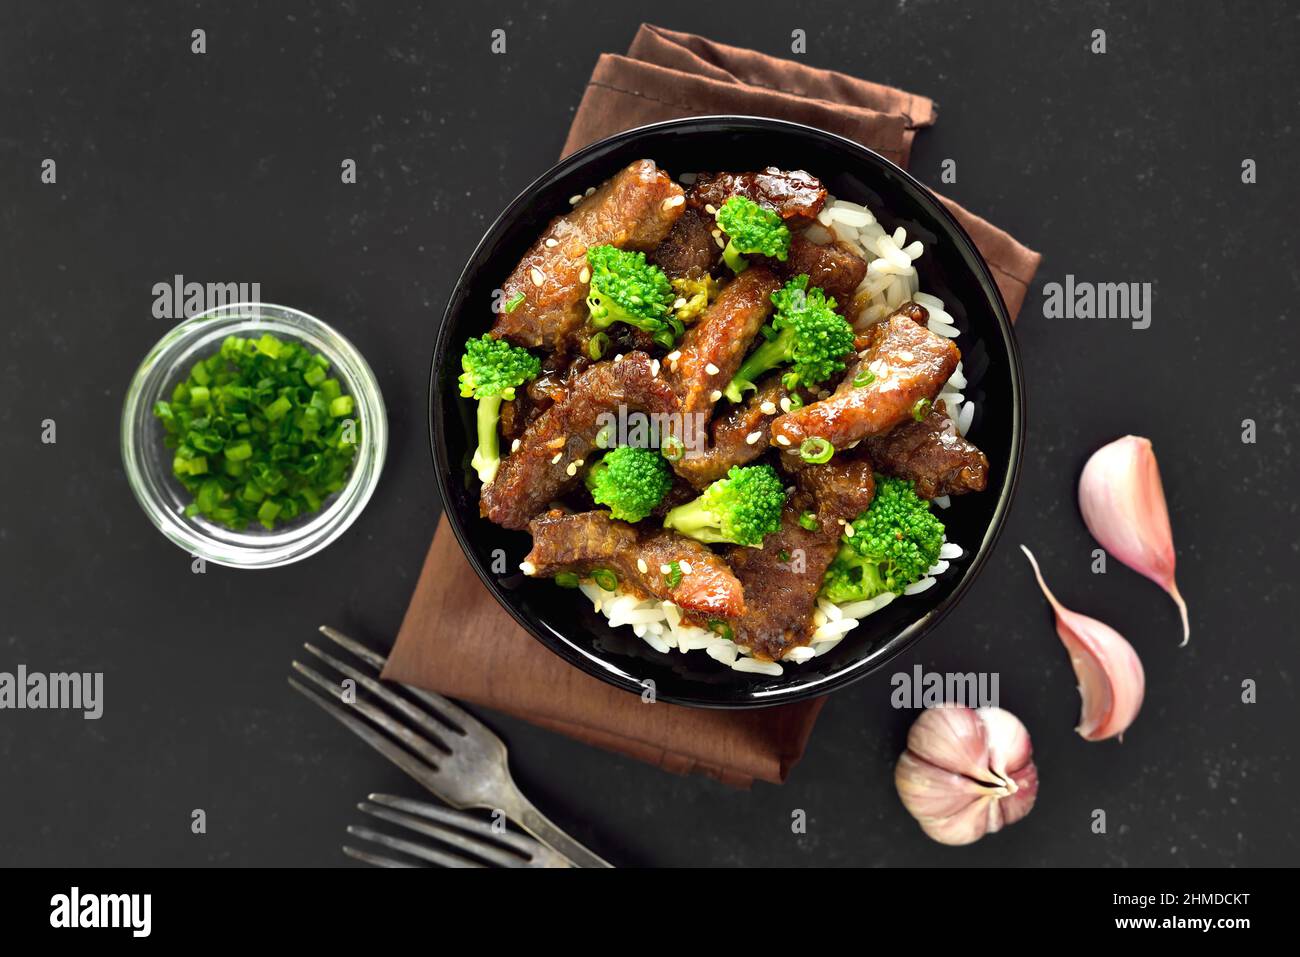 Beef and broccoli stir fry with rice on dark background. Top view, flat lay Stock Photo